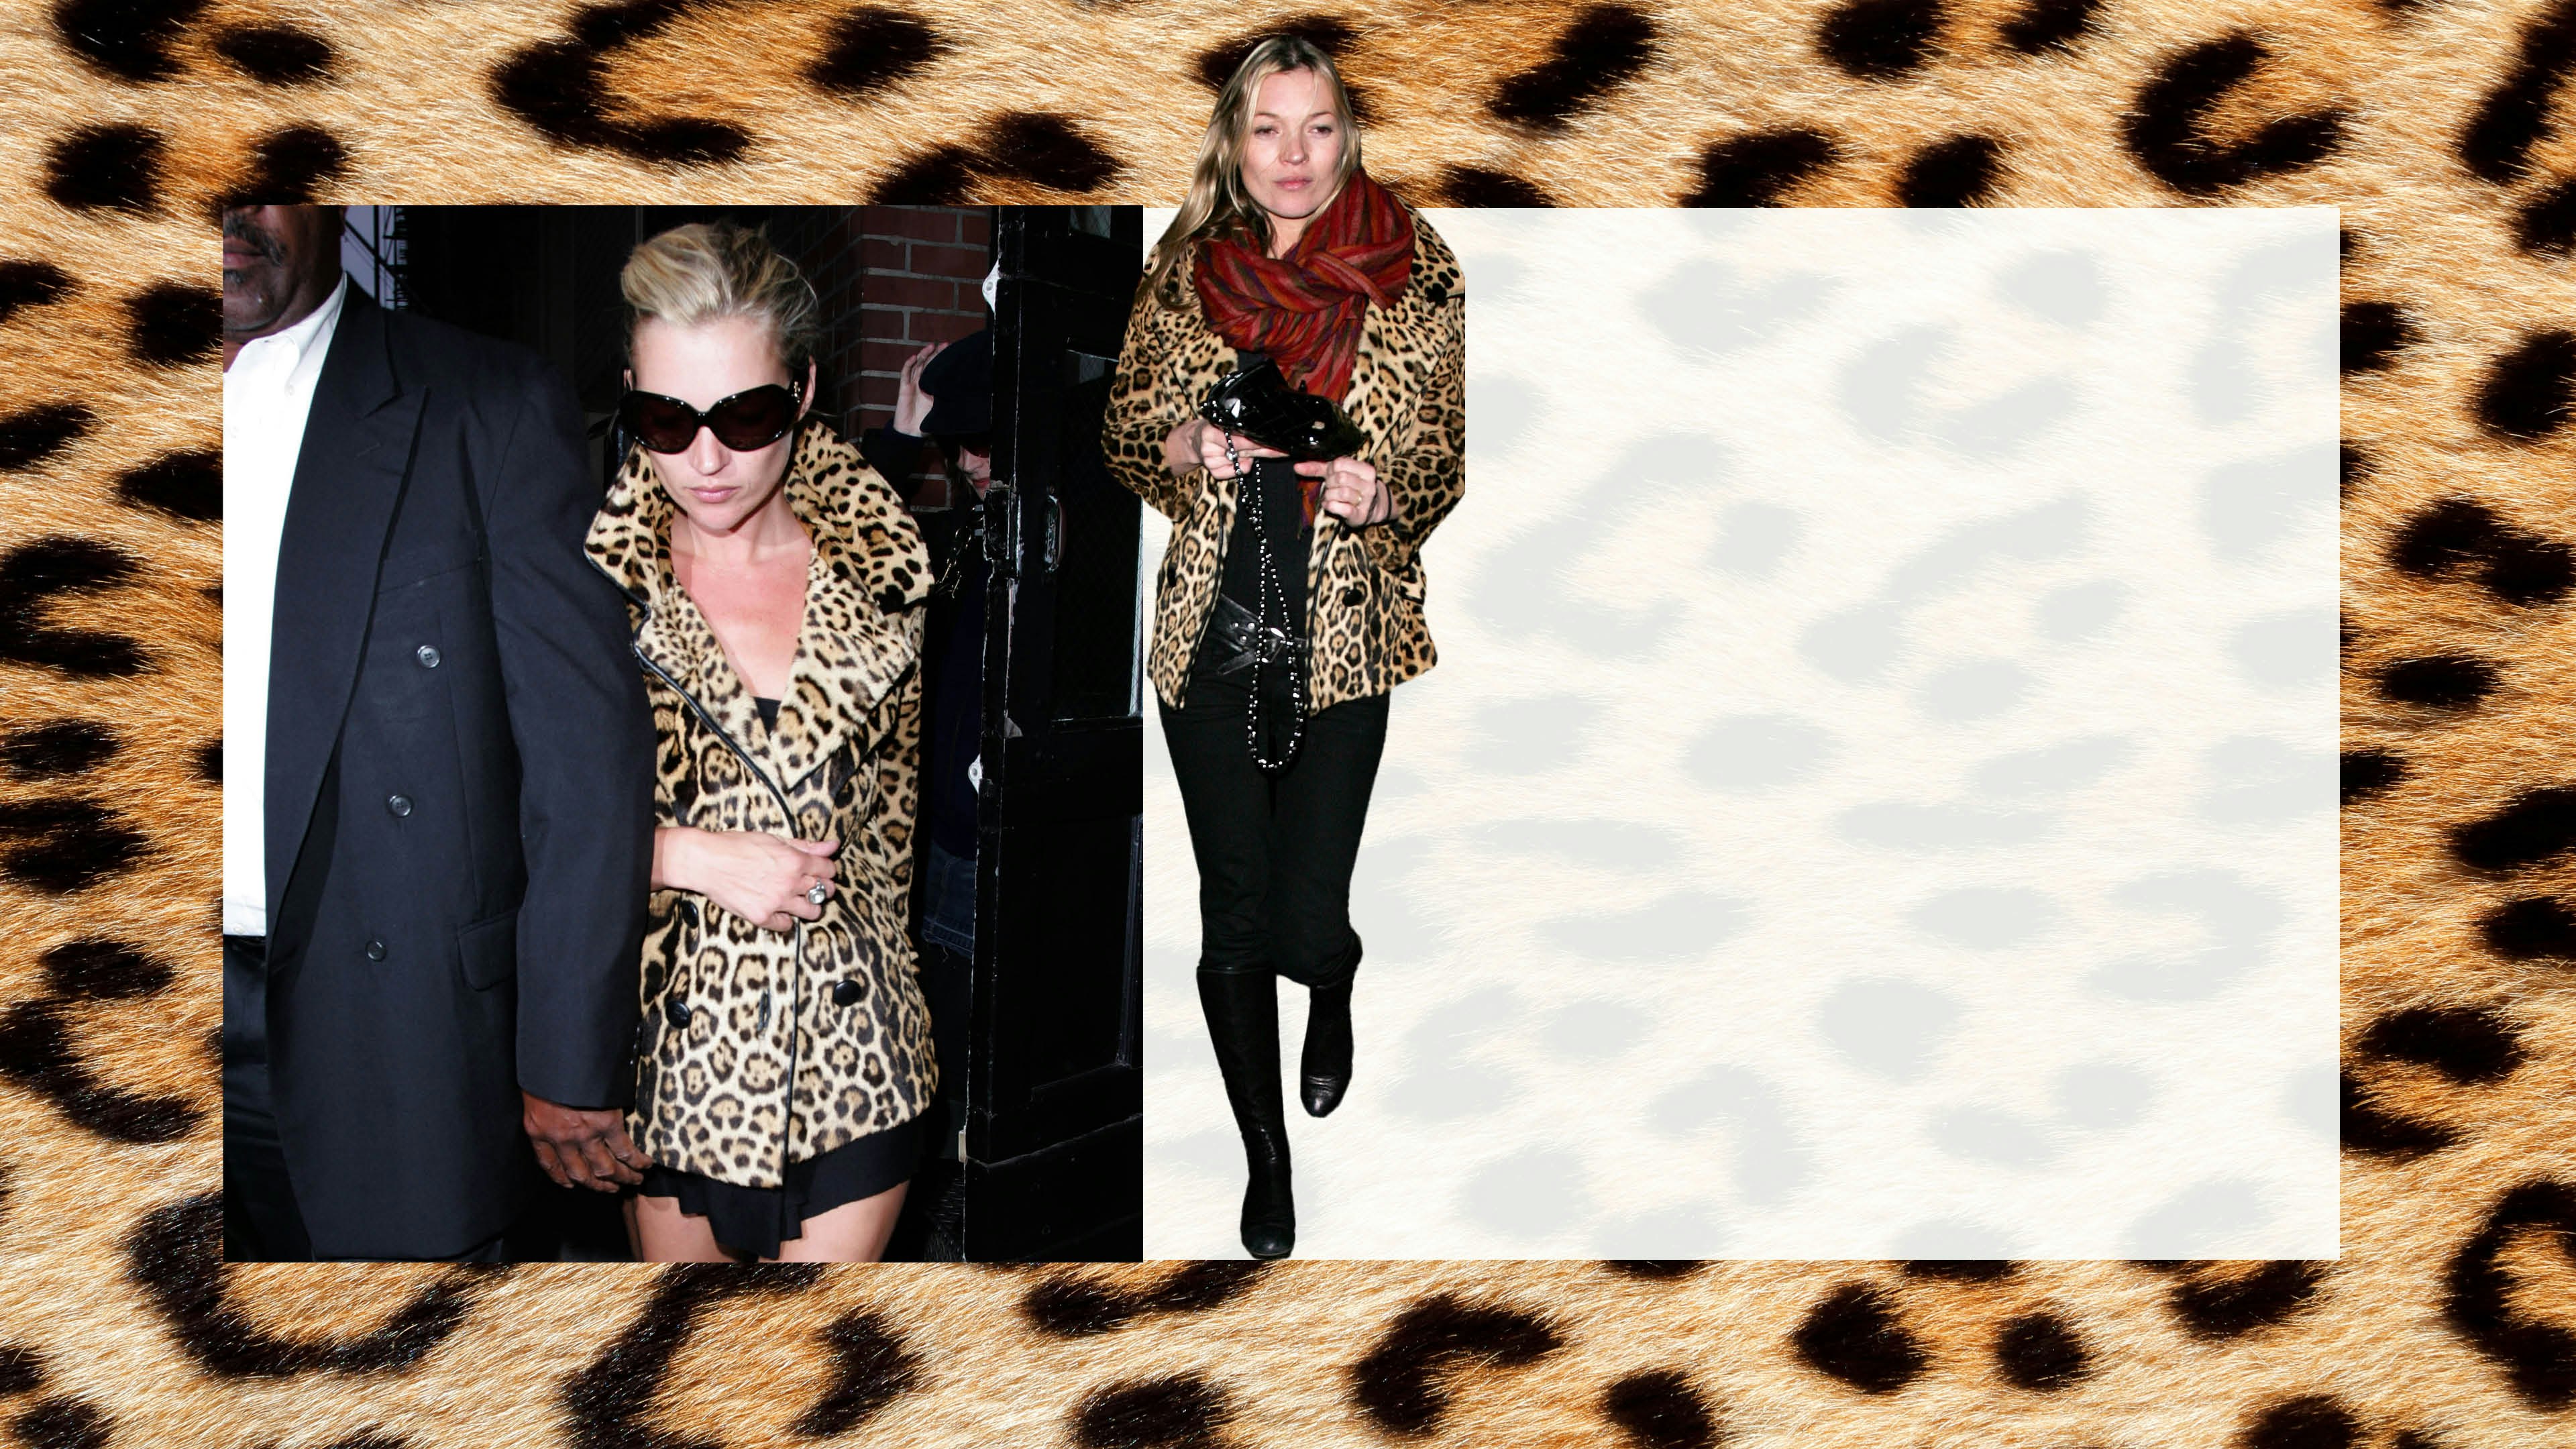 Calzedonia - Spread the voice: leopard tights are the